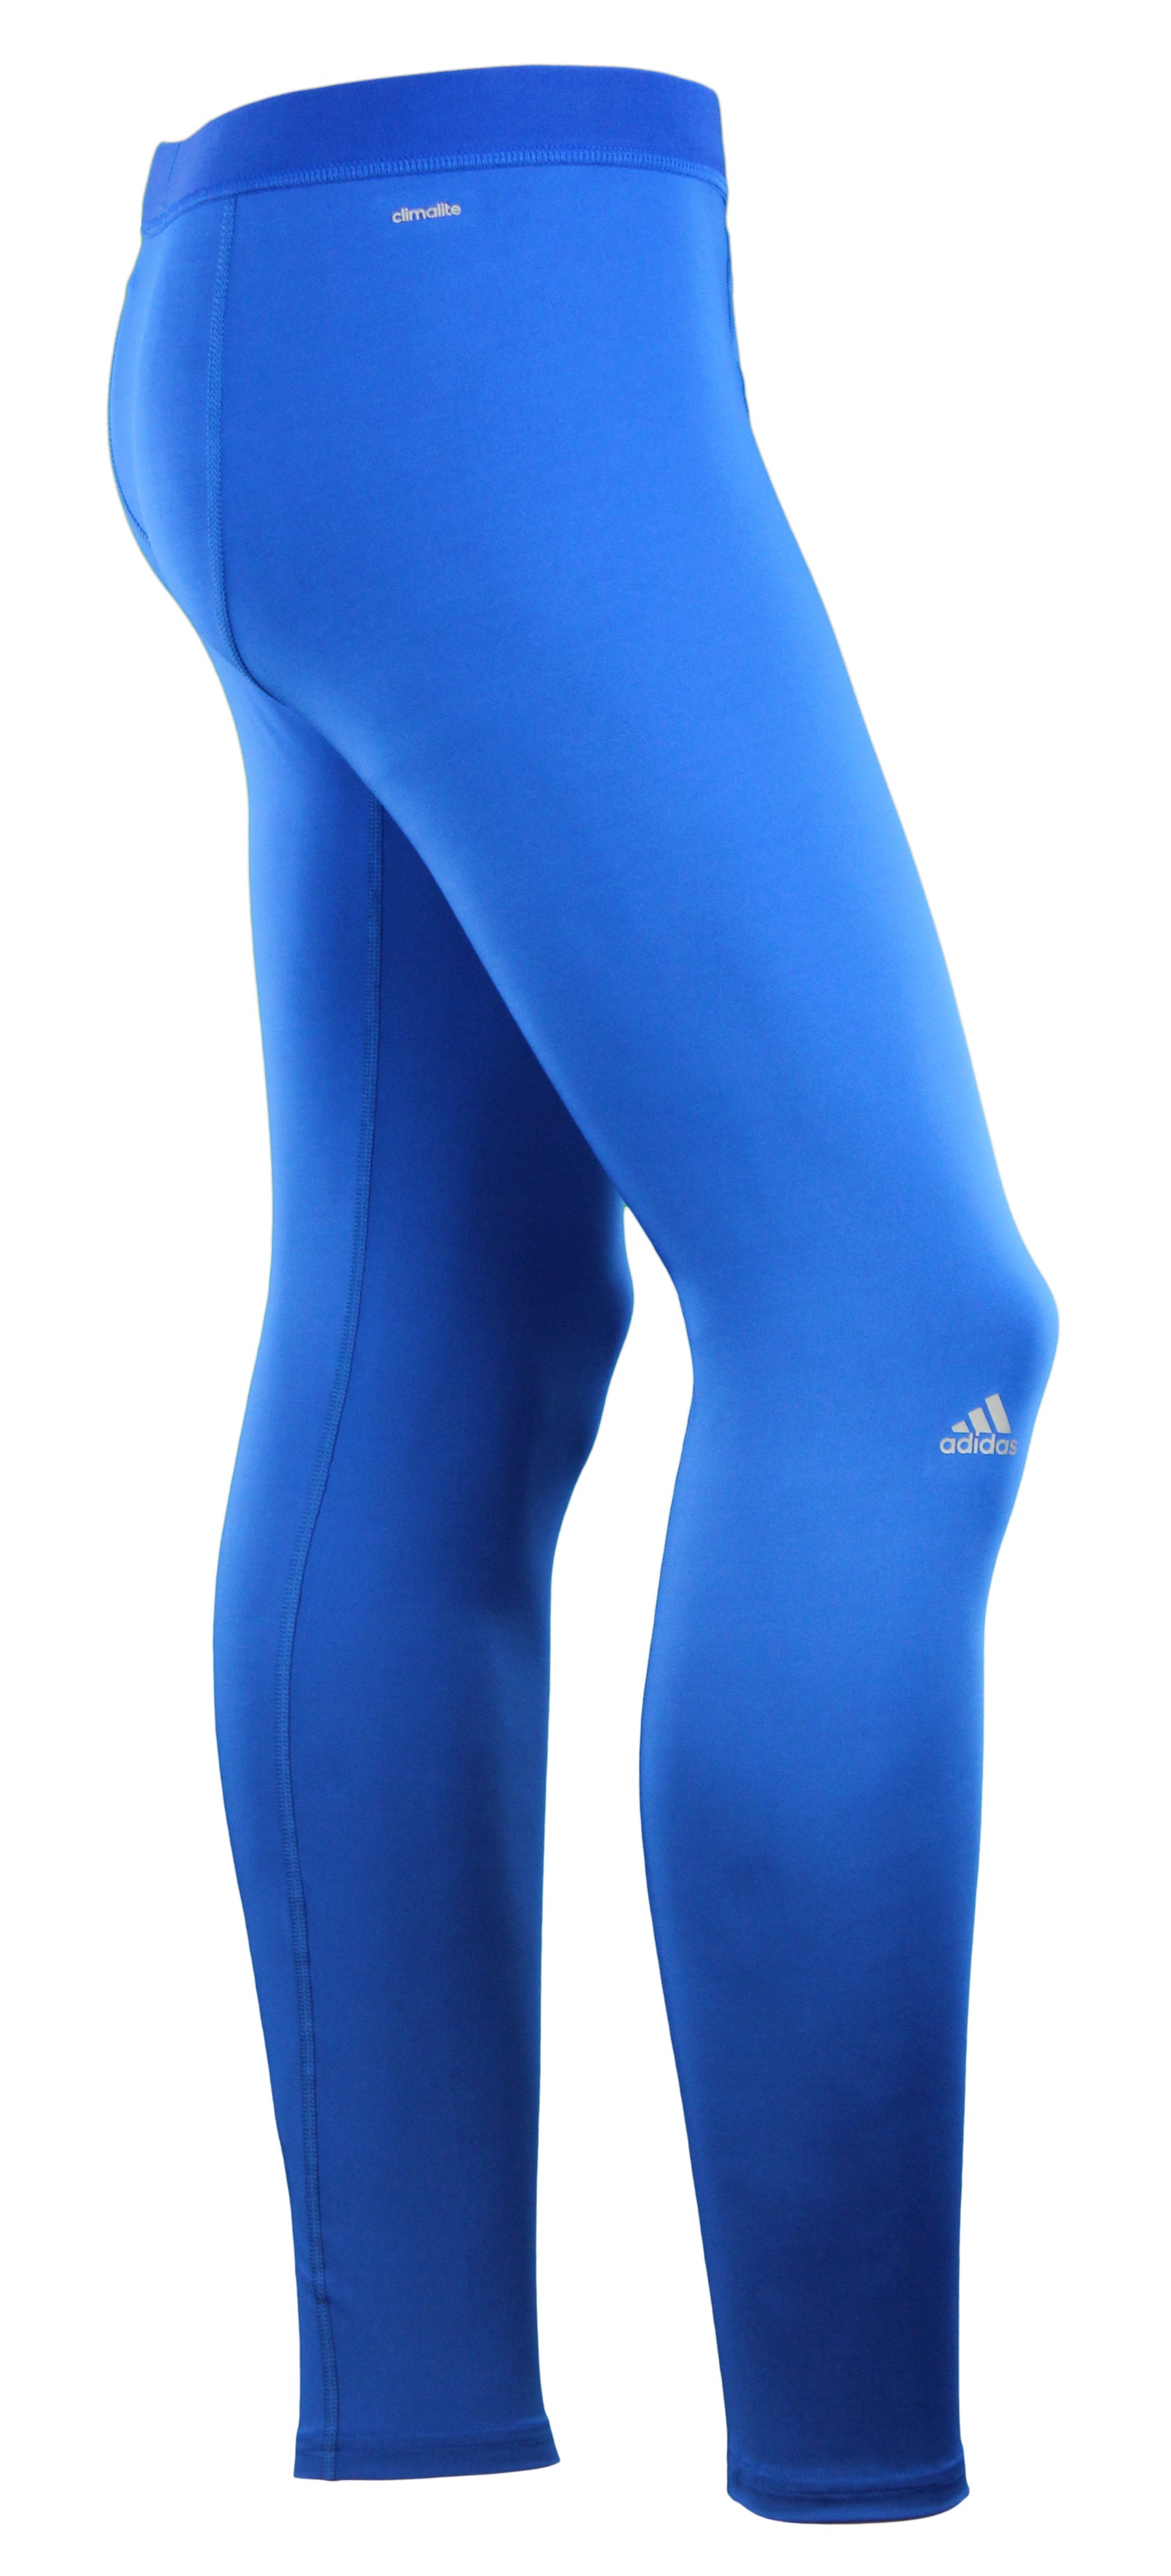 Adidas Compression Thermal Color Options – Fanletic